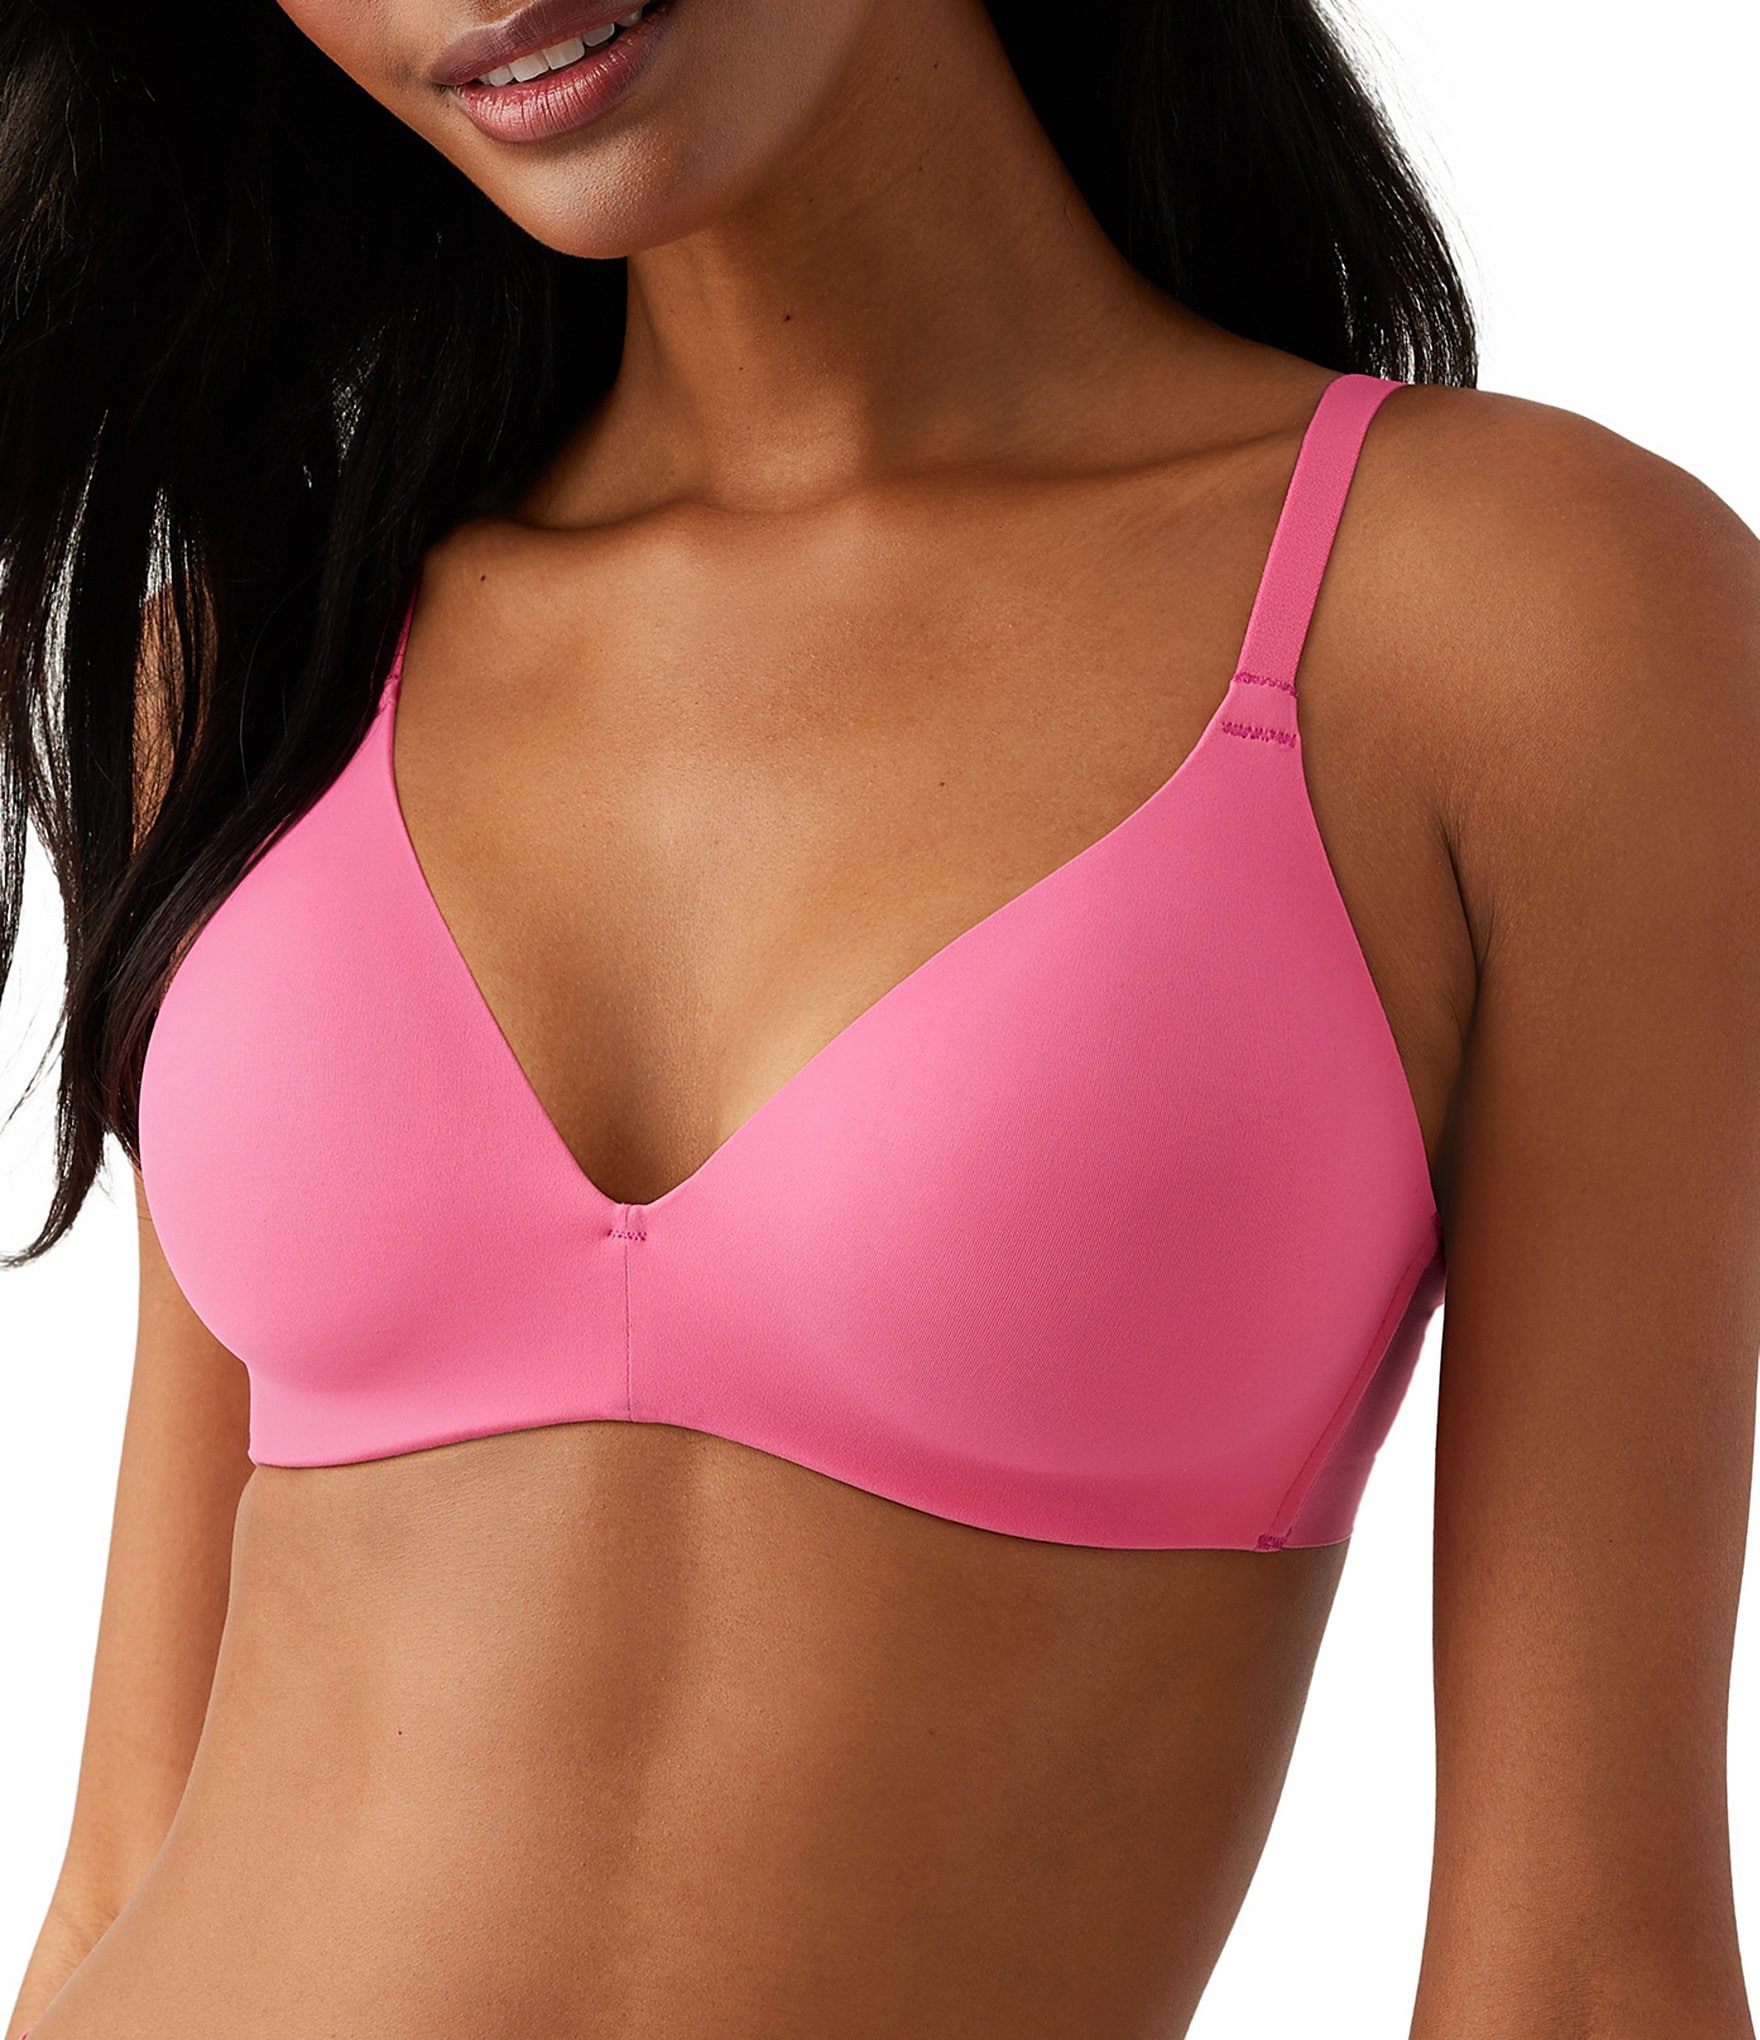 Buy Imported Best Quality Padded Bras for Women at Lowest Price in Pakistan